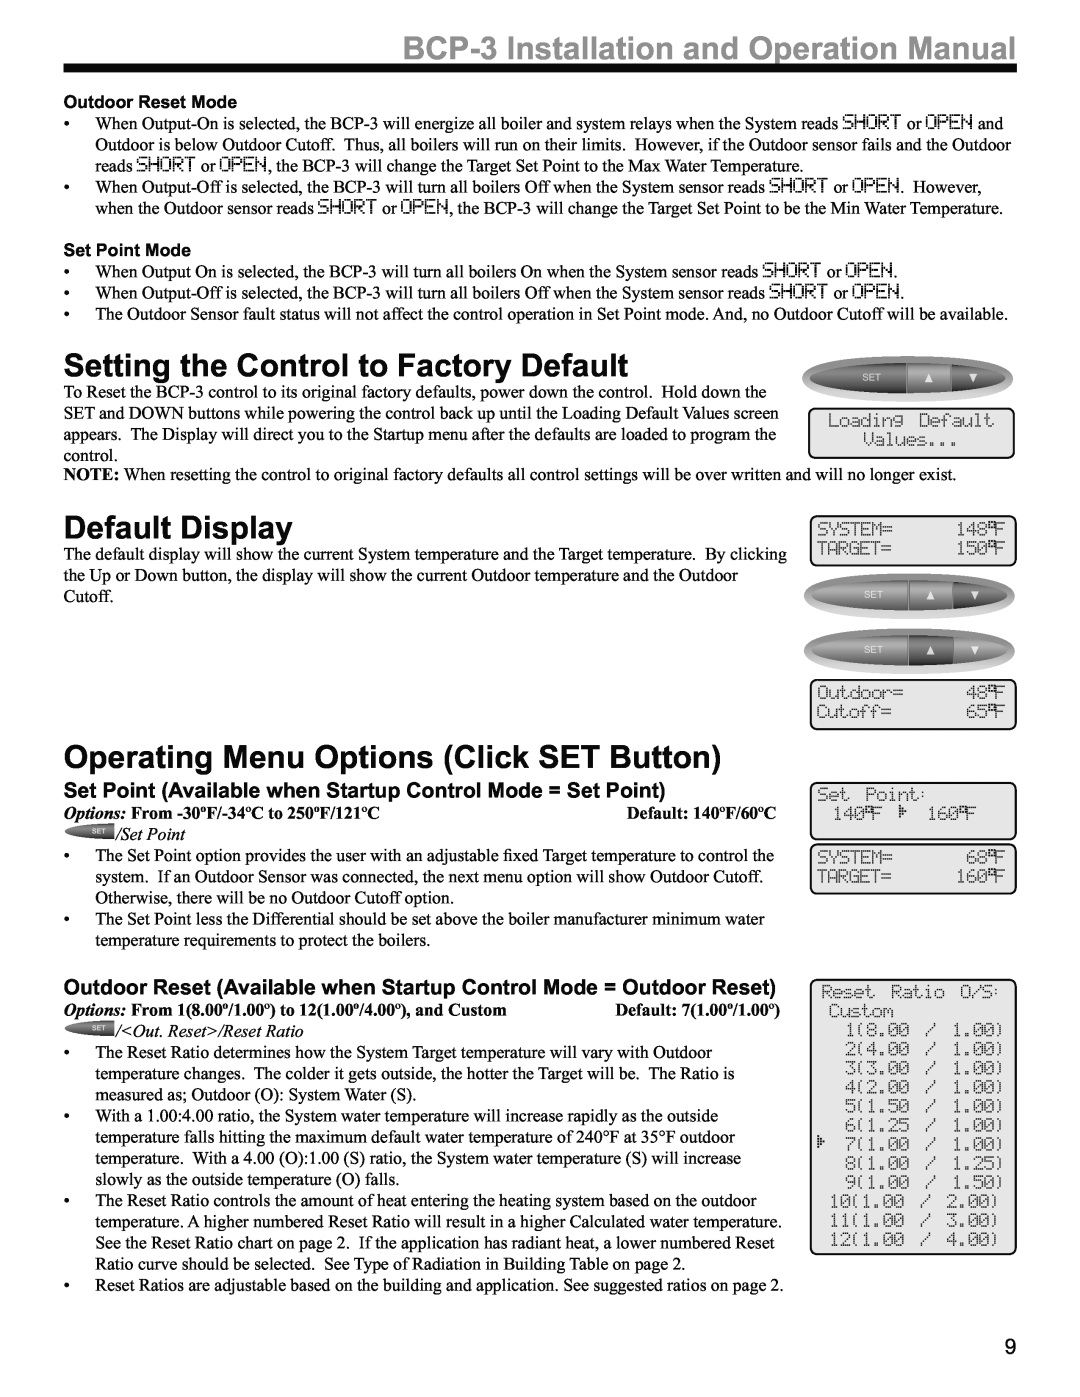 Weil-McLain BCP-3 manual Setting the Control to Factory Default, Default Display, Operating Menu Options Click SET Button 